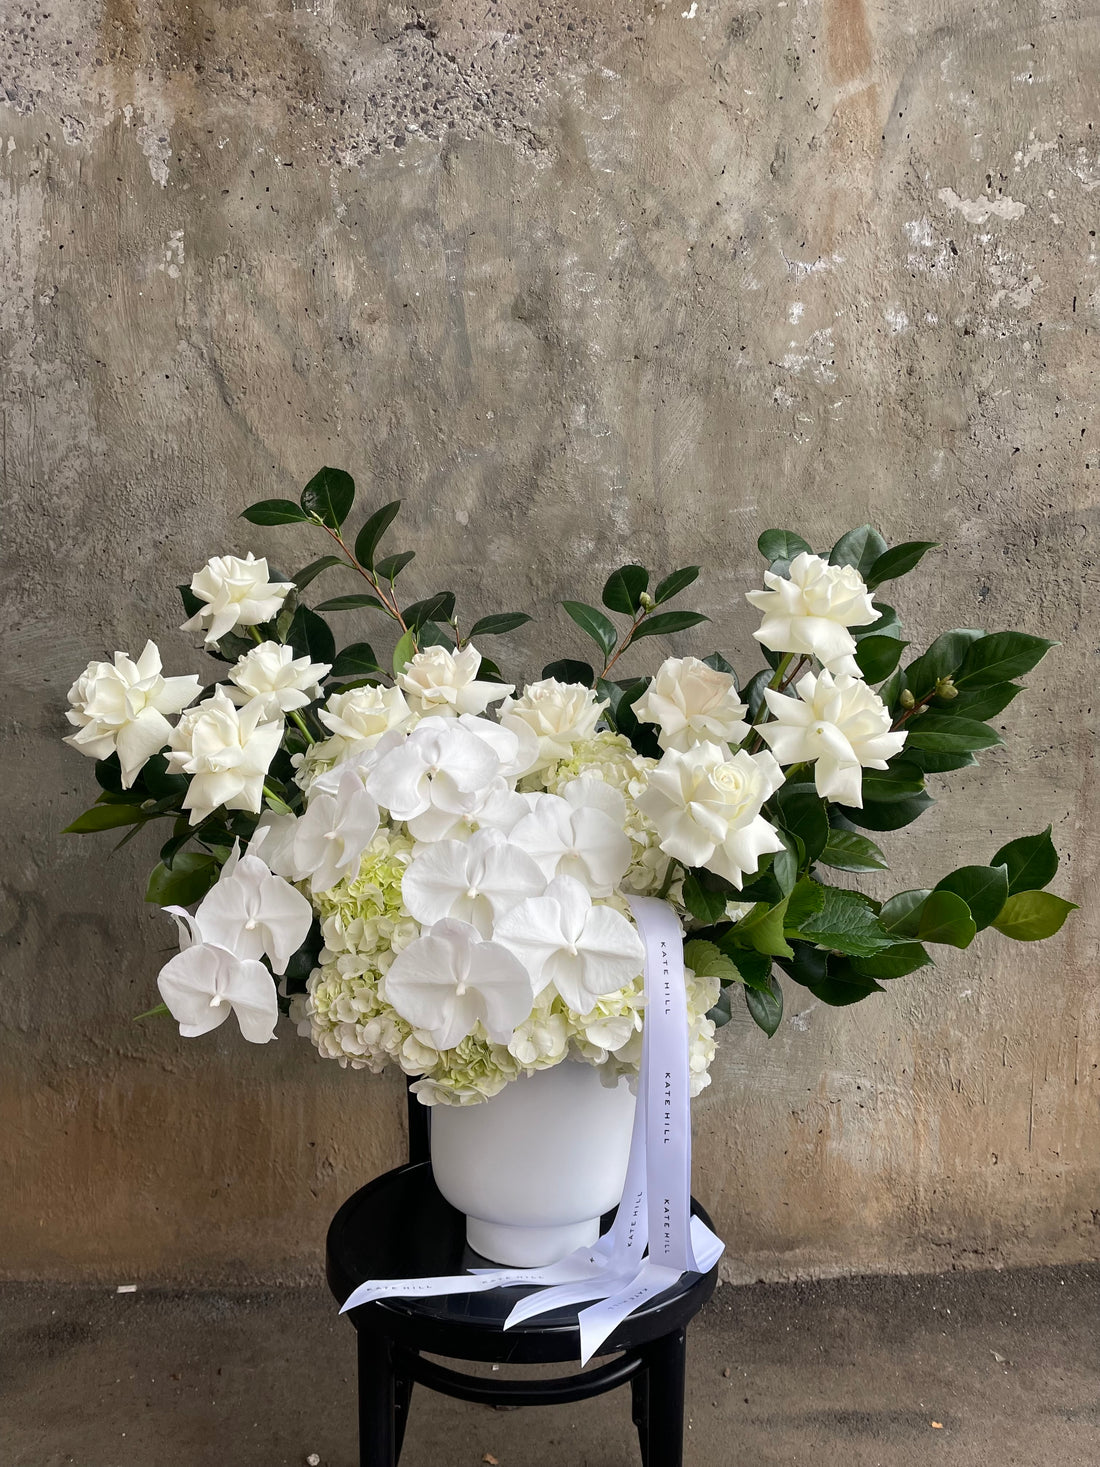 A large luxe white flower design sitting on a black bentwood chair with concrete wall behind.